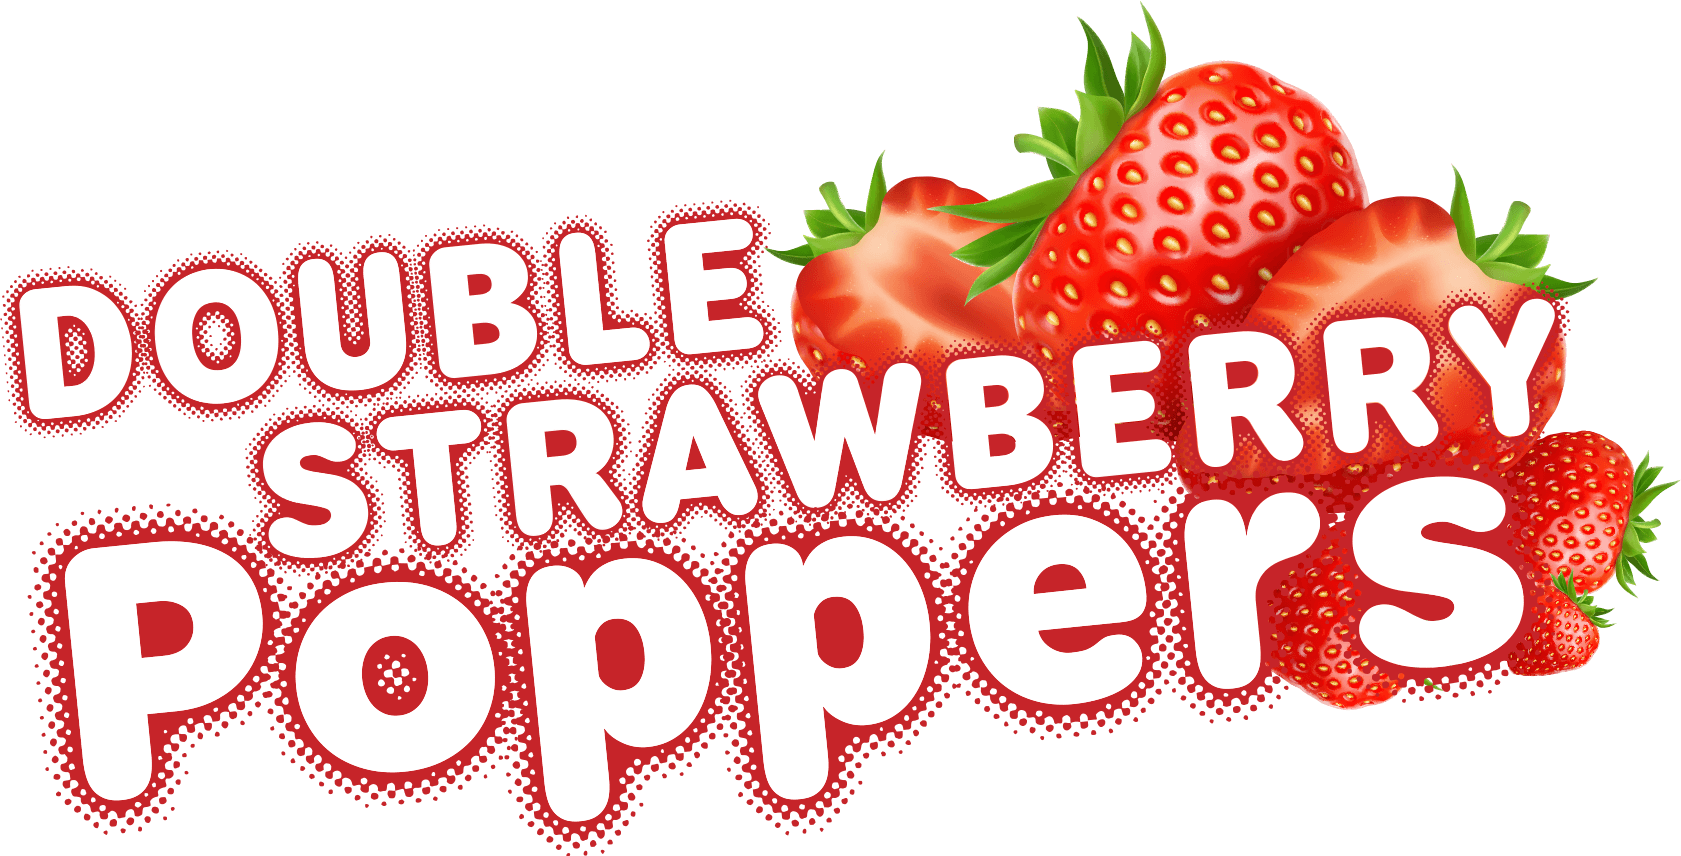 Strawberry Poppers